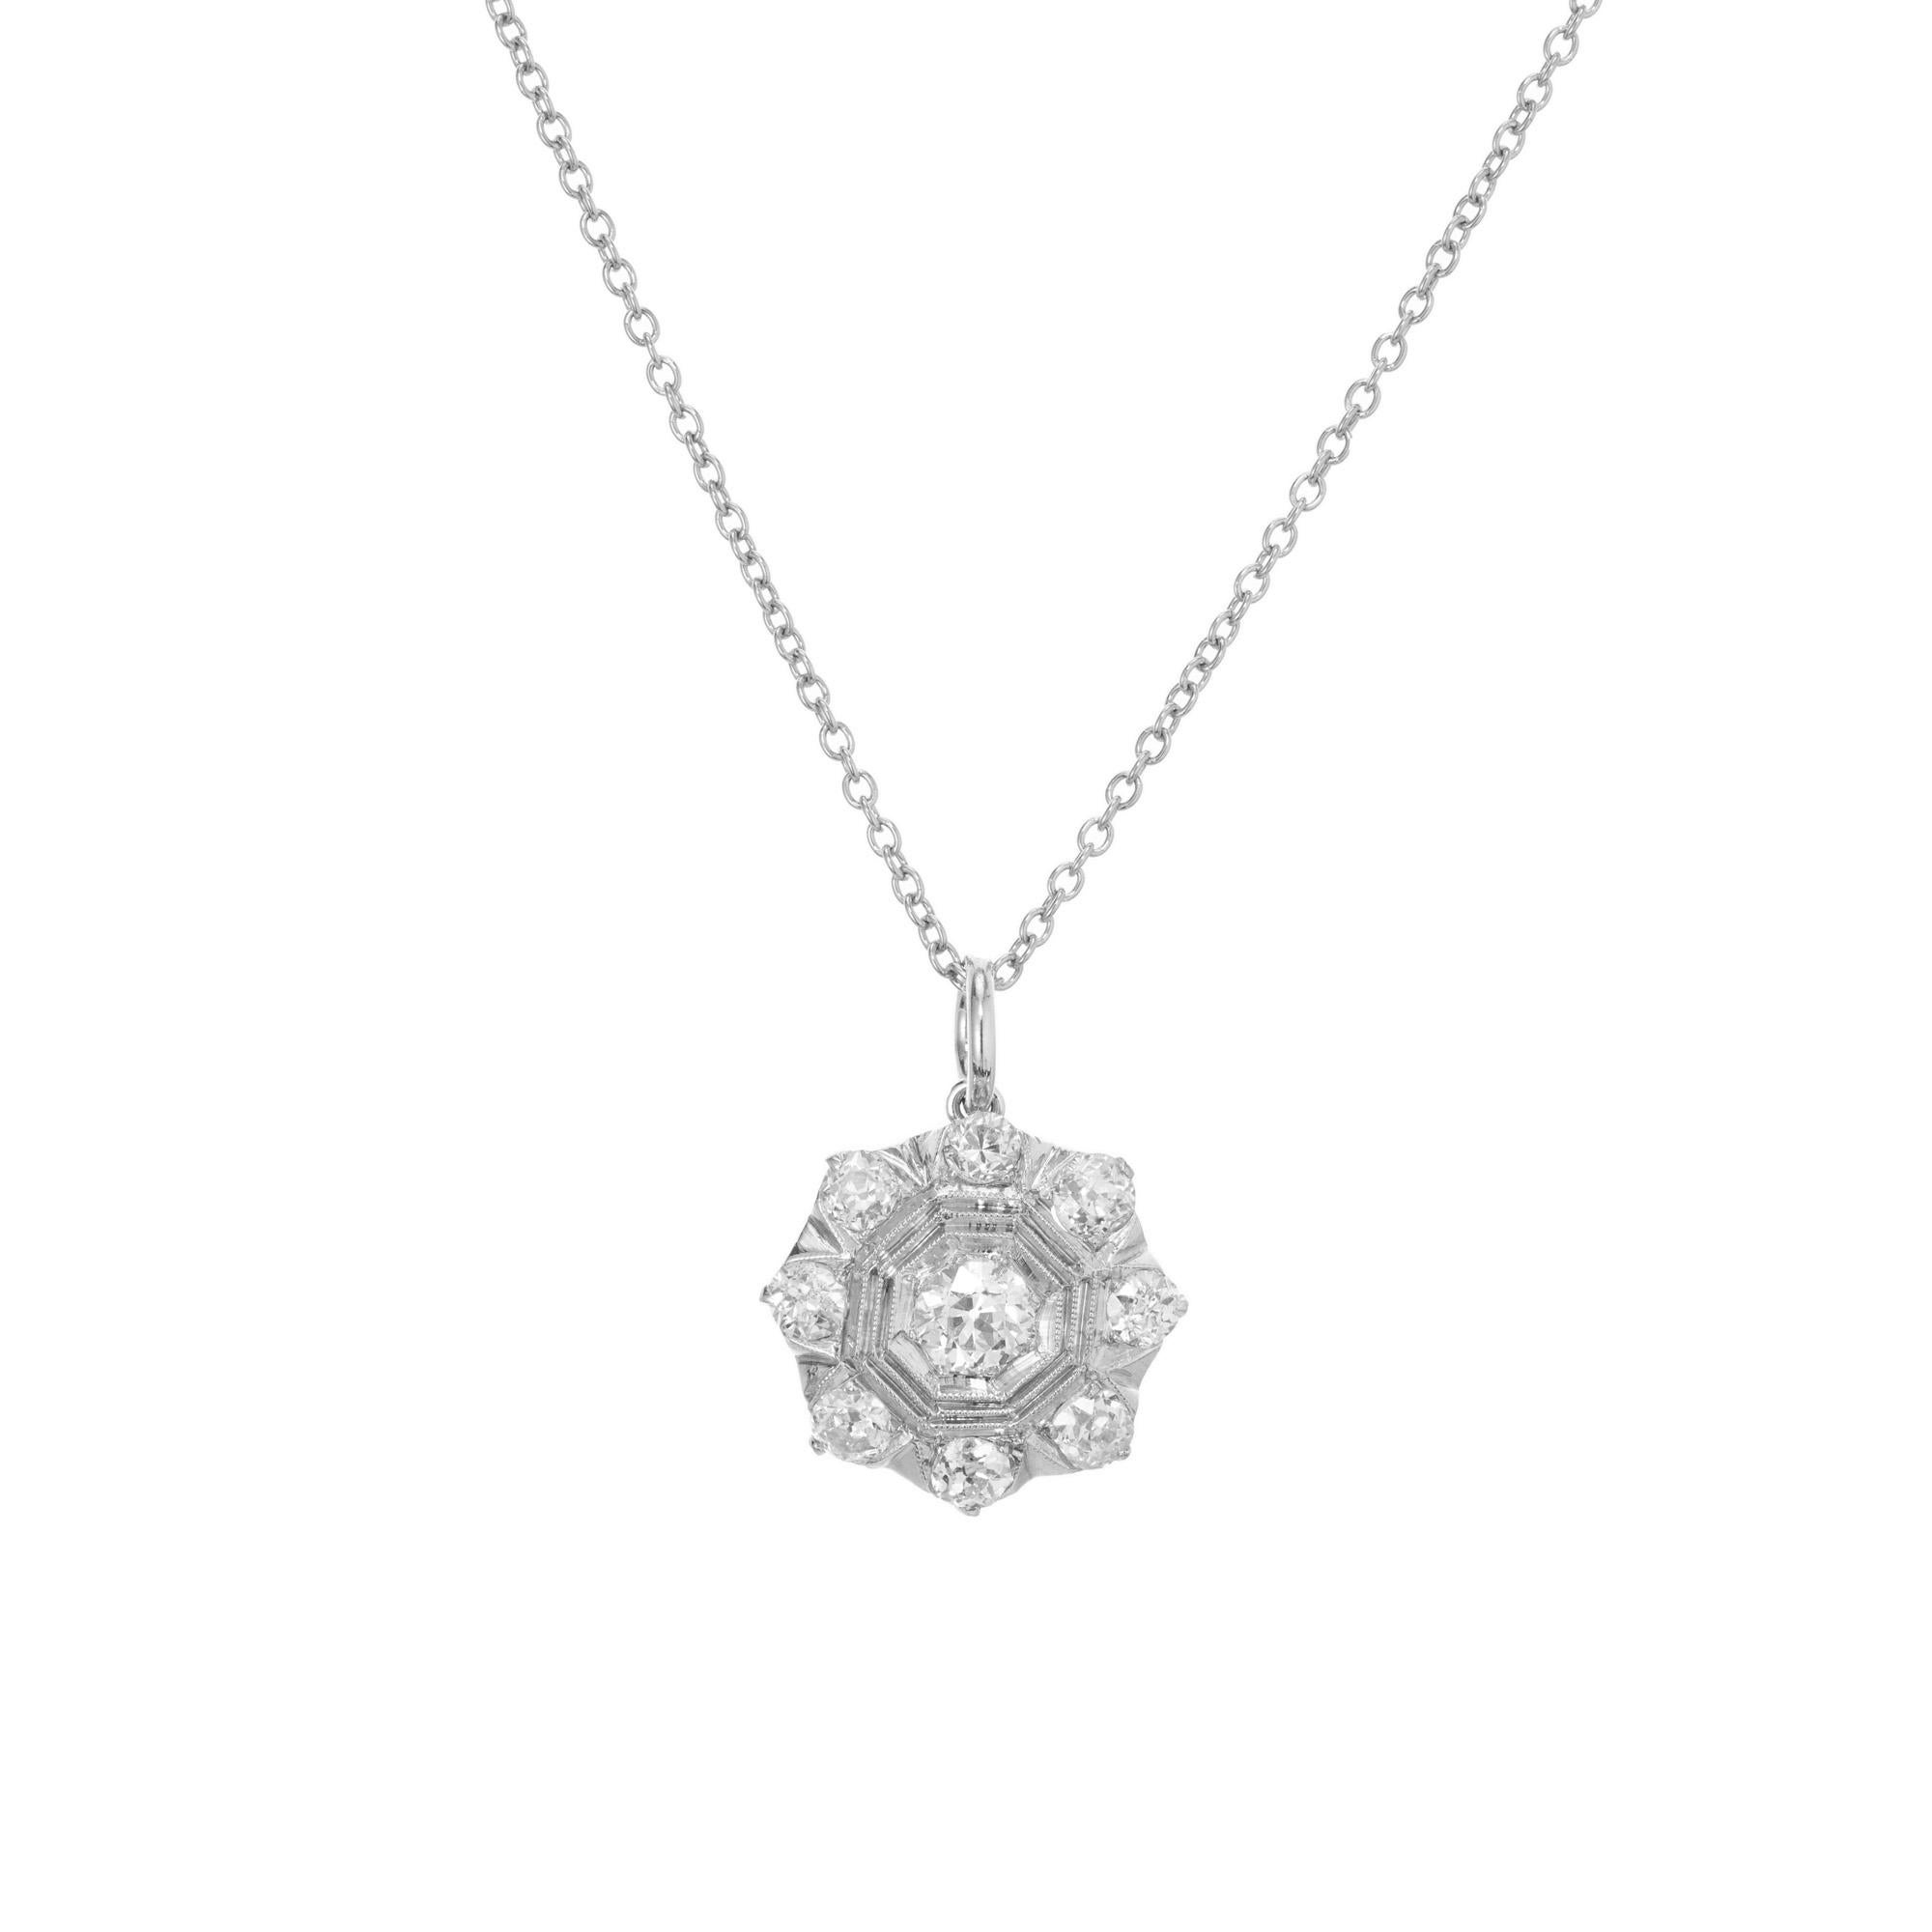 Victorian diamond compass style pendant necklace. This beautiful pendant starts with one Old European cut center diamond framed by a triple octagon with a halo of eight Old mine cut diamonds. The chain measures 16 inches in length. Circa